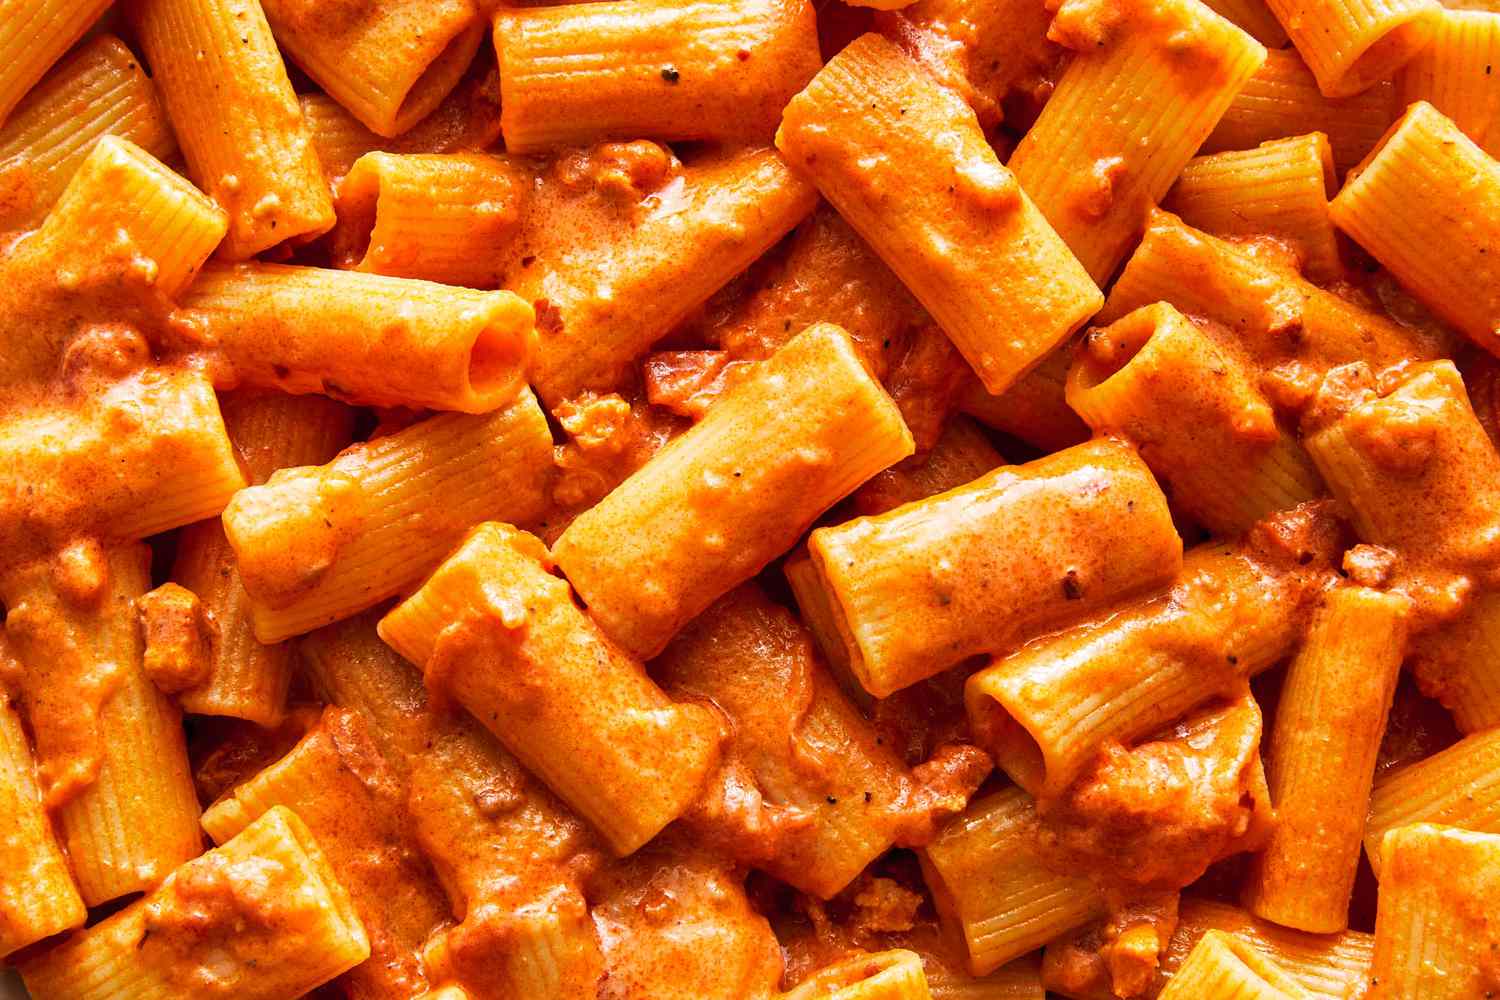 Does Vodka Sauce Have Gluten? [Answered!]